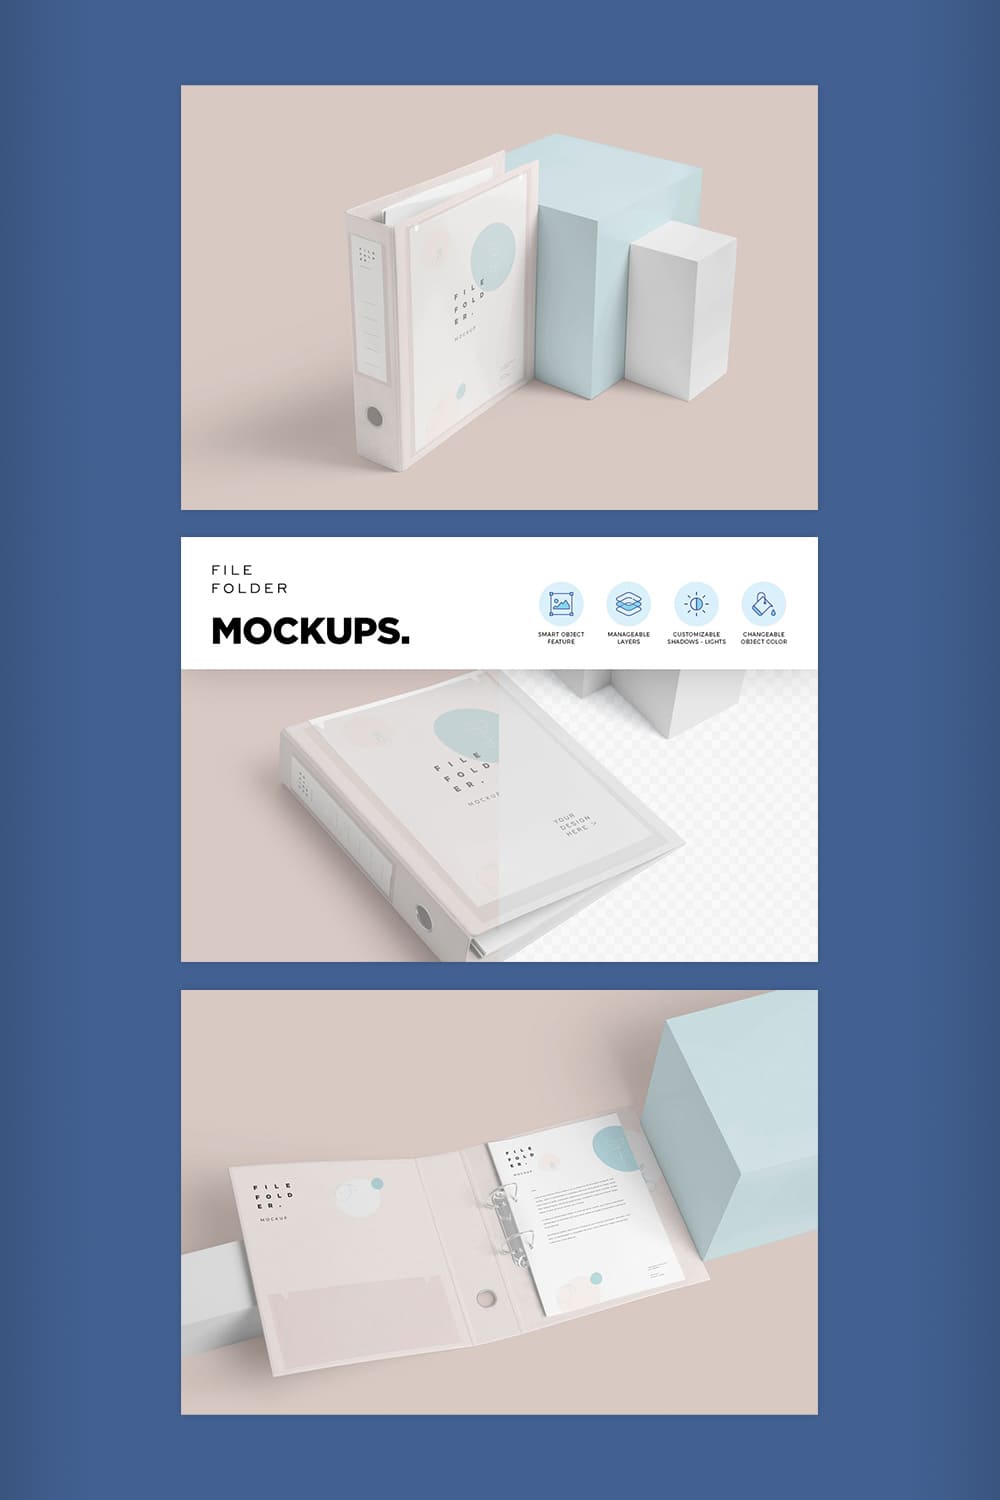 Collection of folders for files on a blue background with a beautiful design.